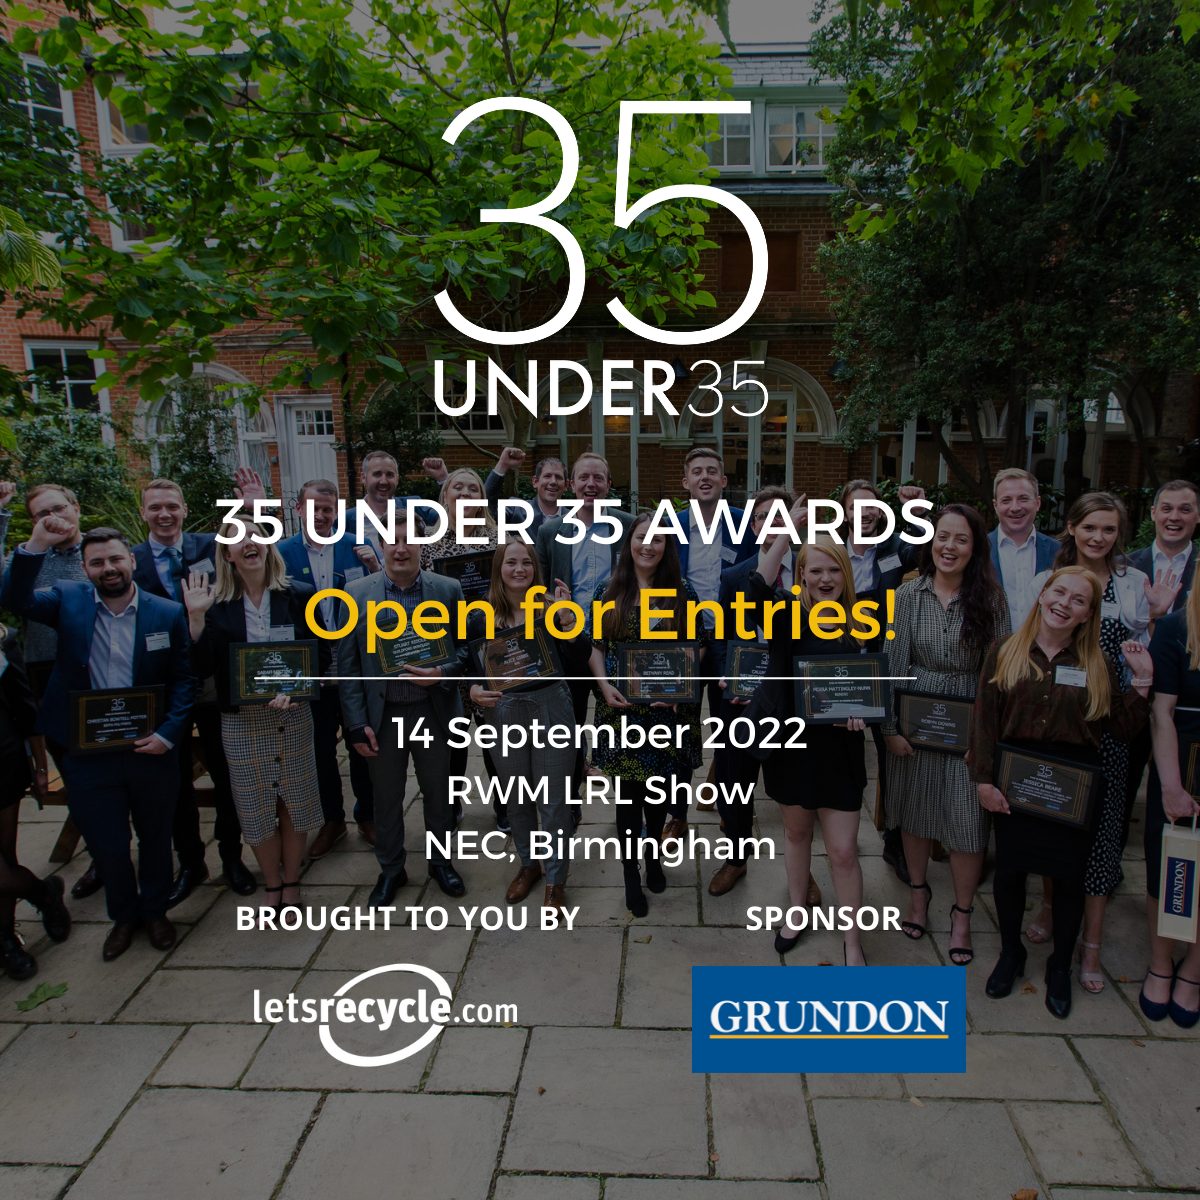 The 35 UNDER 35 scheme is open exclusively to those who work in the waste, recycling and organics industries, and the deadline for entries is 1 July 2022. 